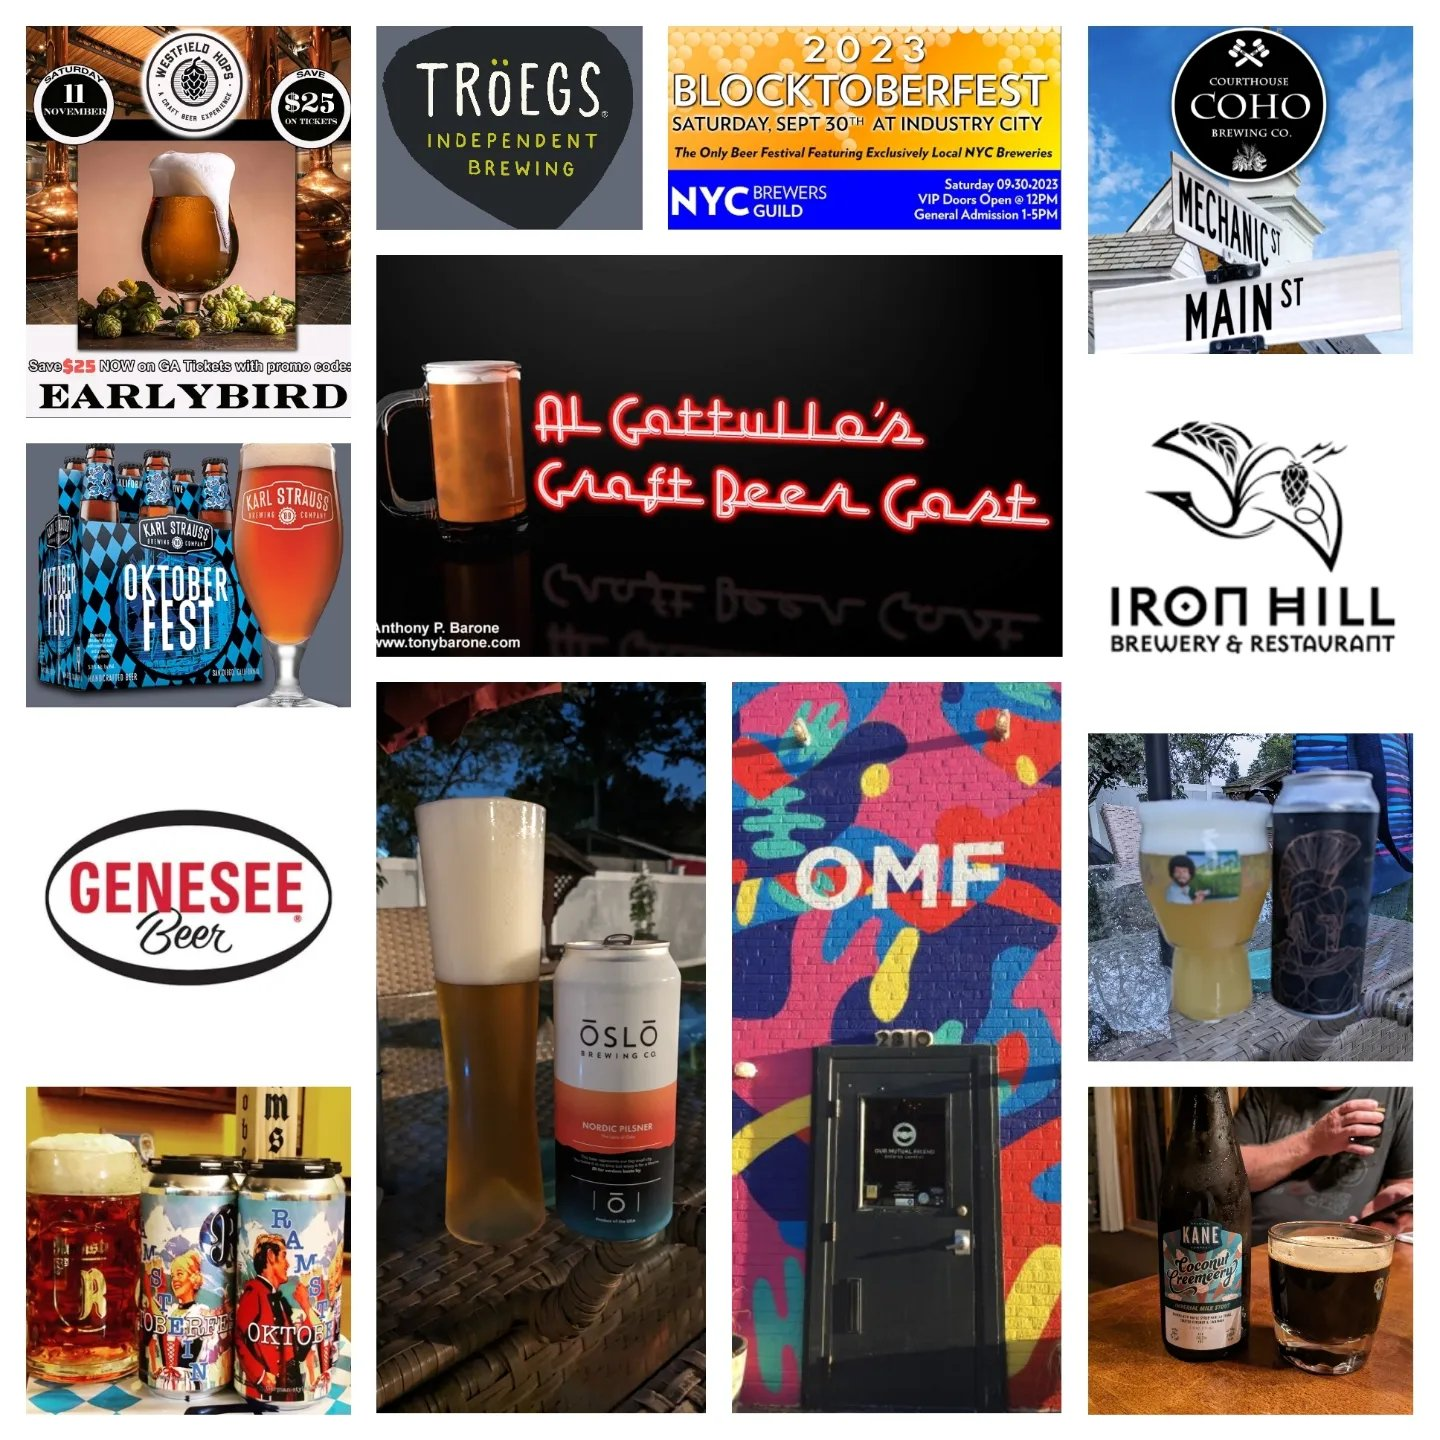 AG Craft Beer Cast 8-27-23 Paige Engard GCV Museum